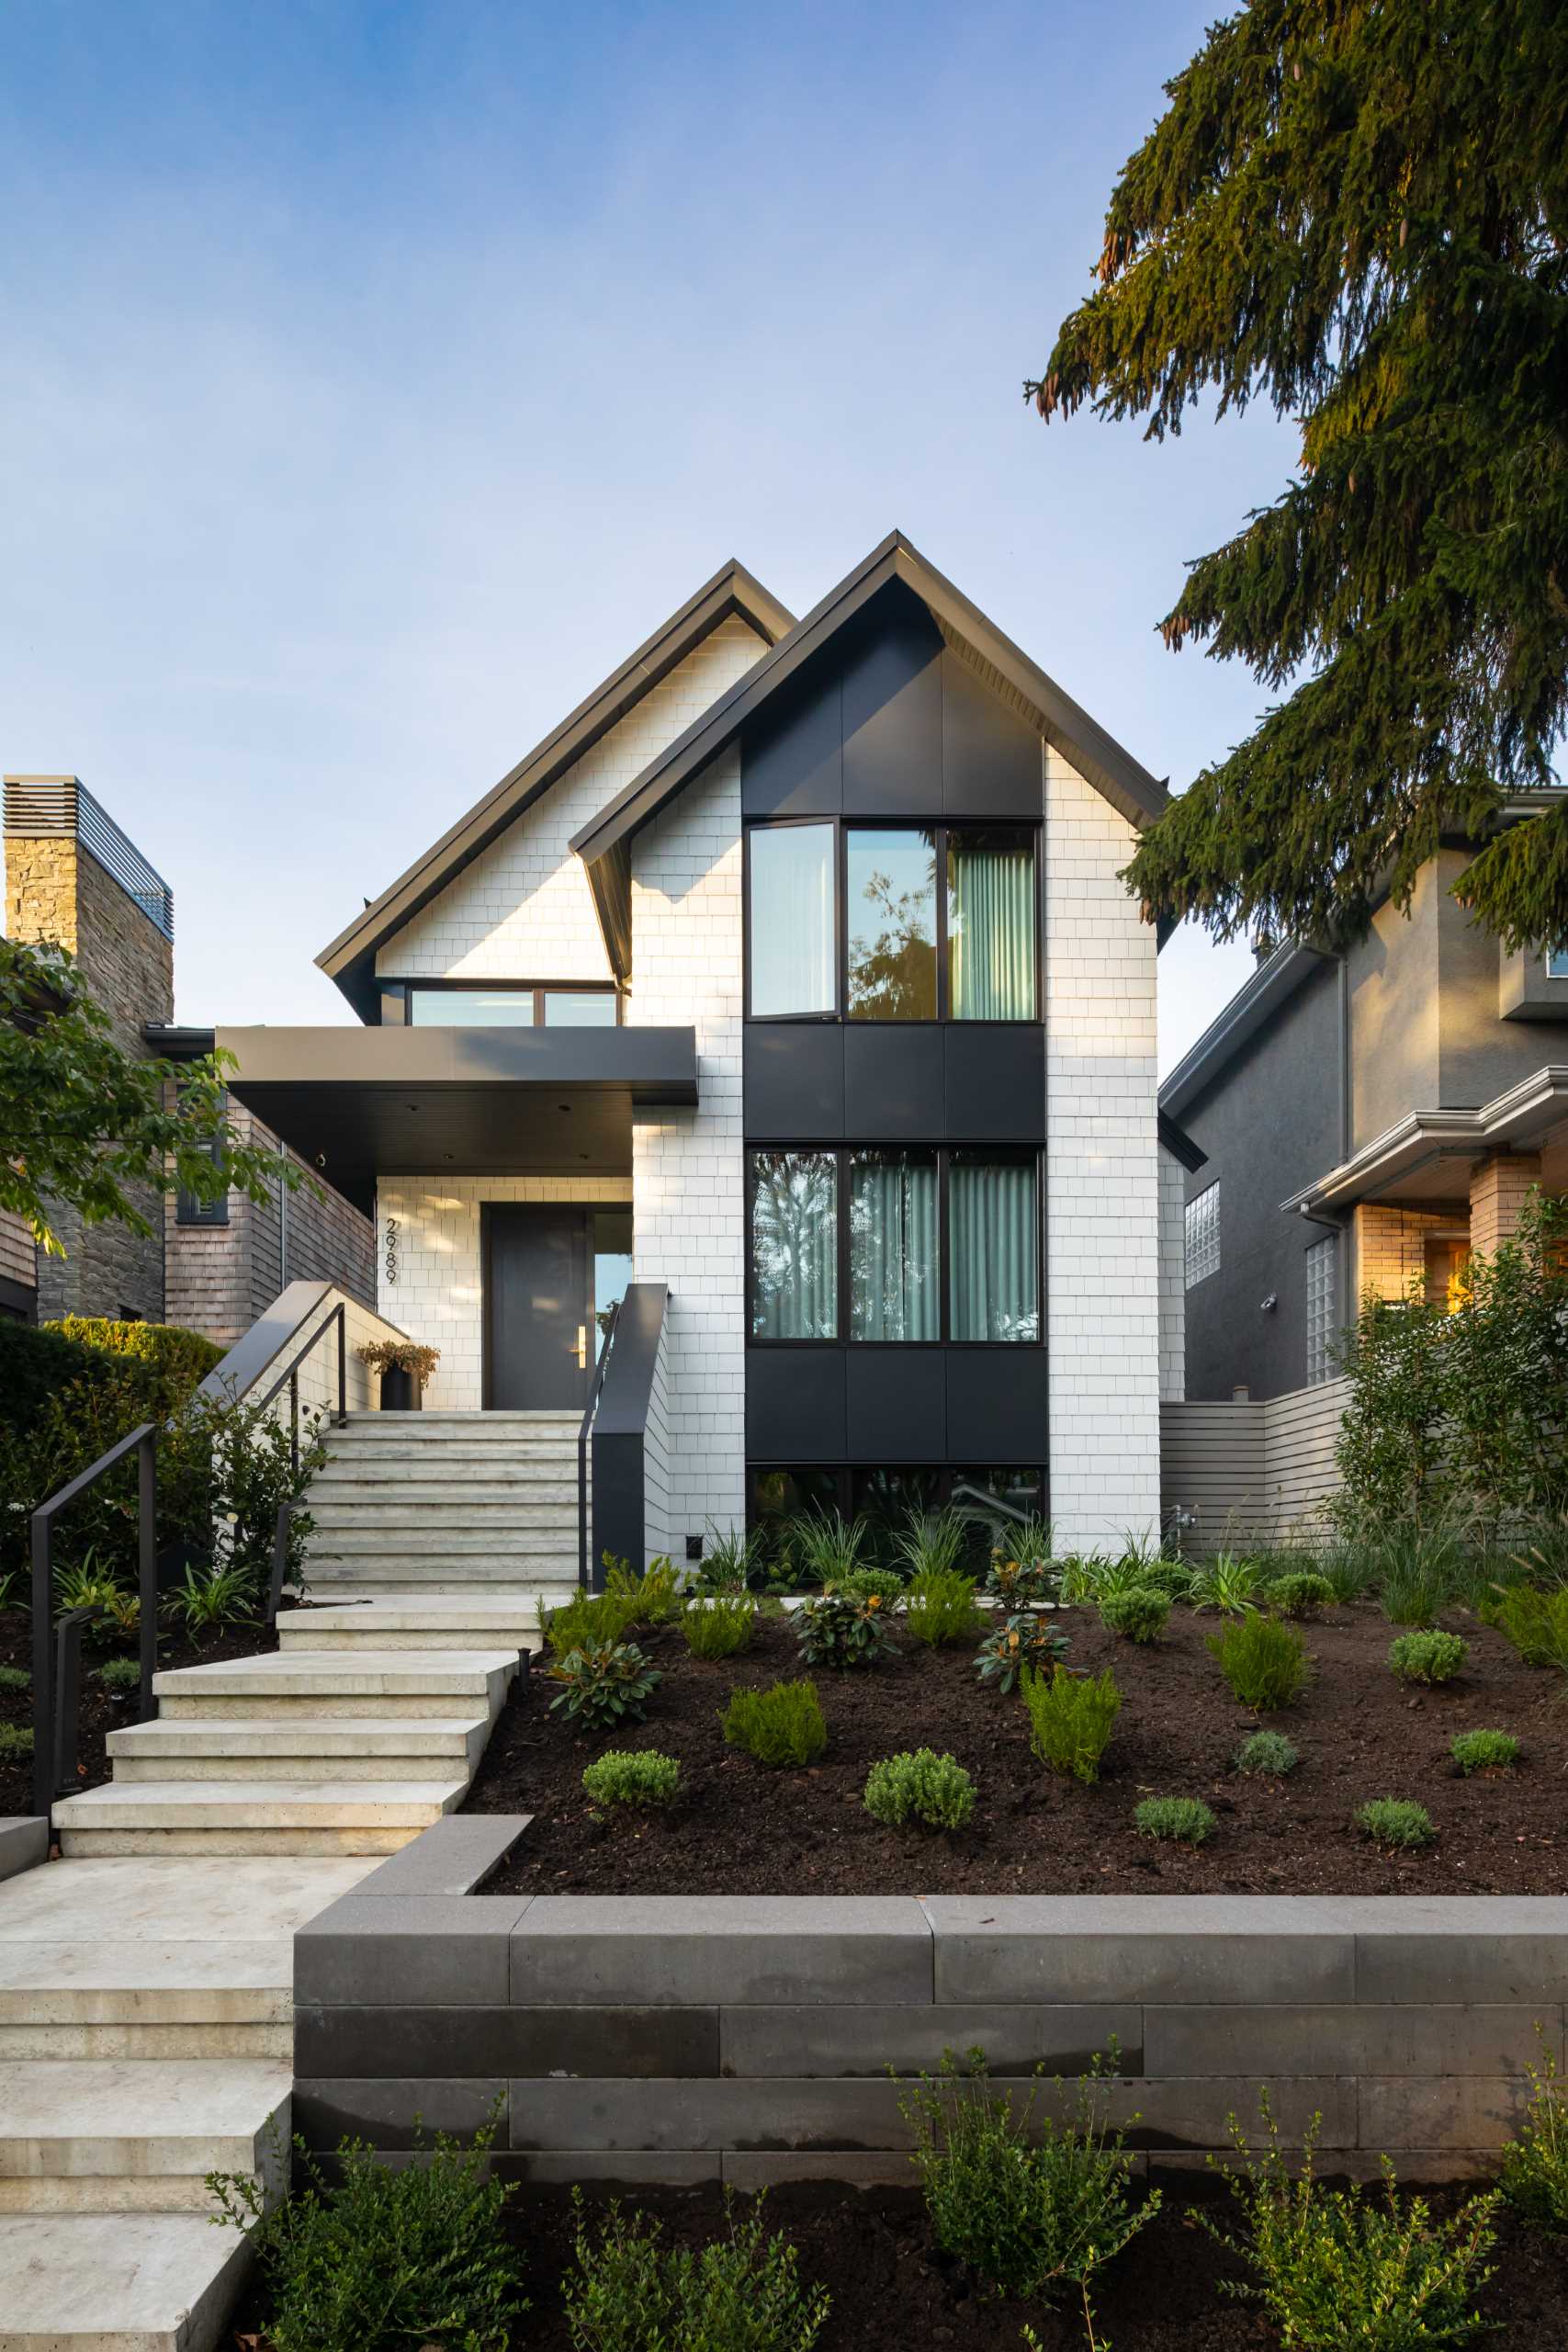 A contemporary home with white shingles and black accents.